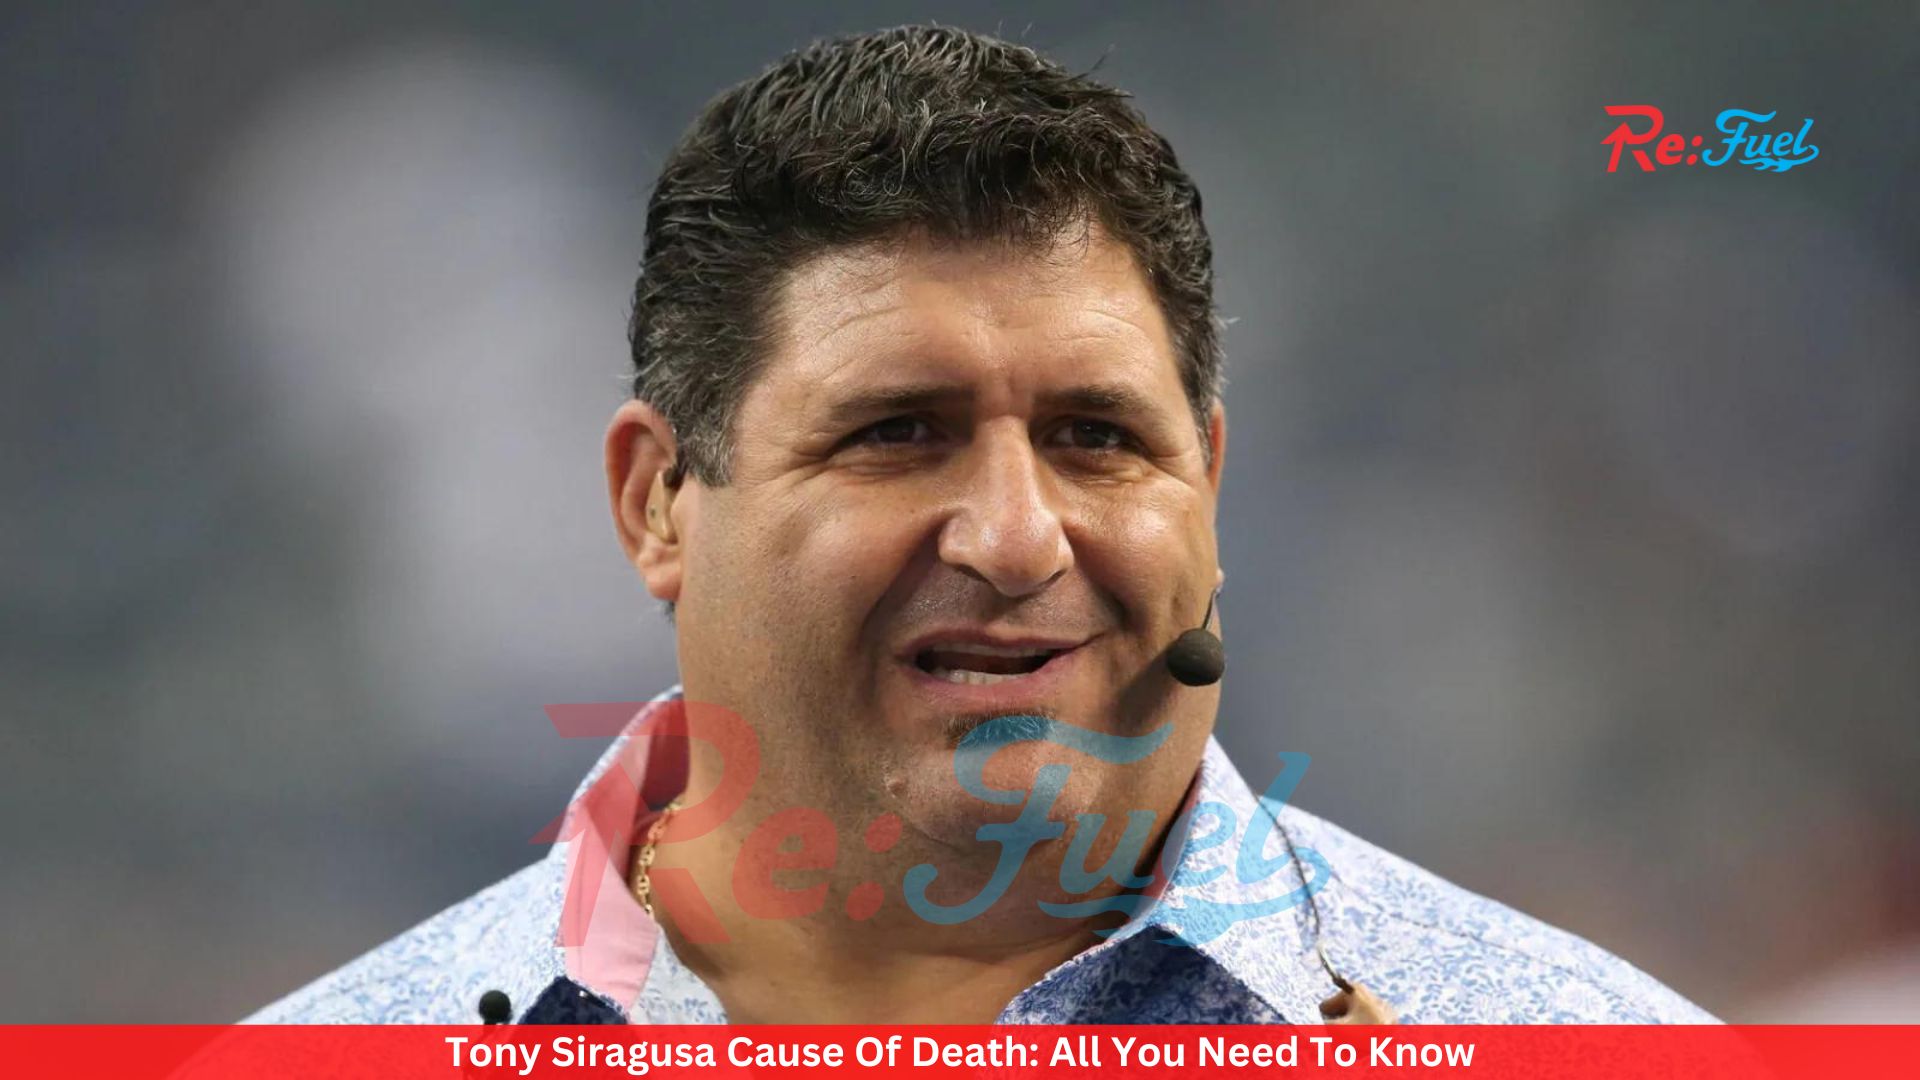 Tony Siragusa Cause Of Death: All You Need To Know